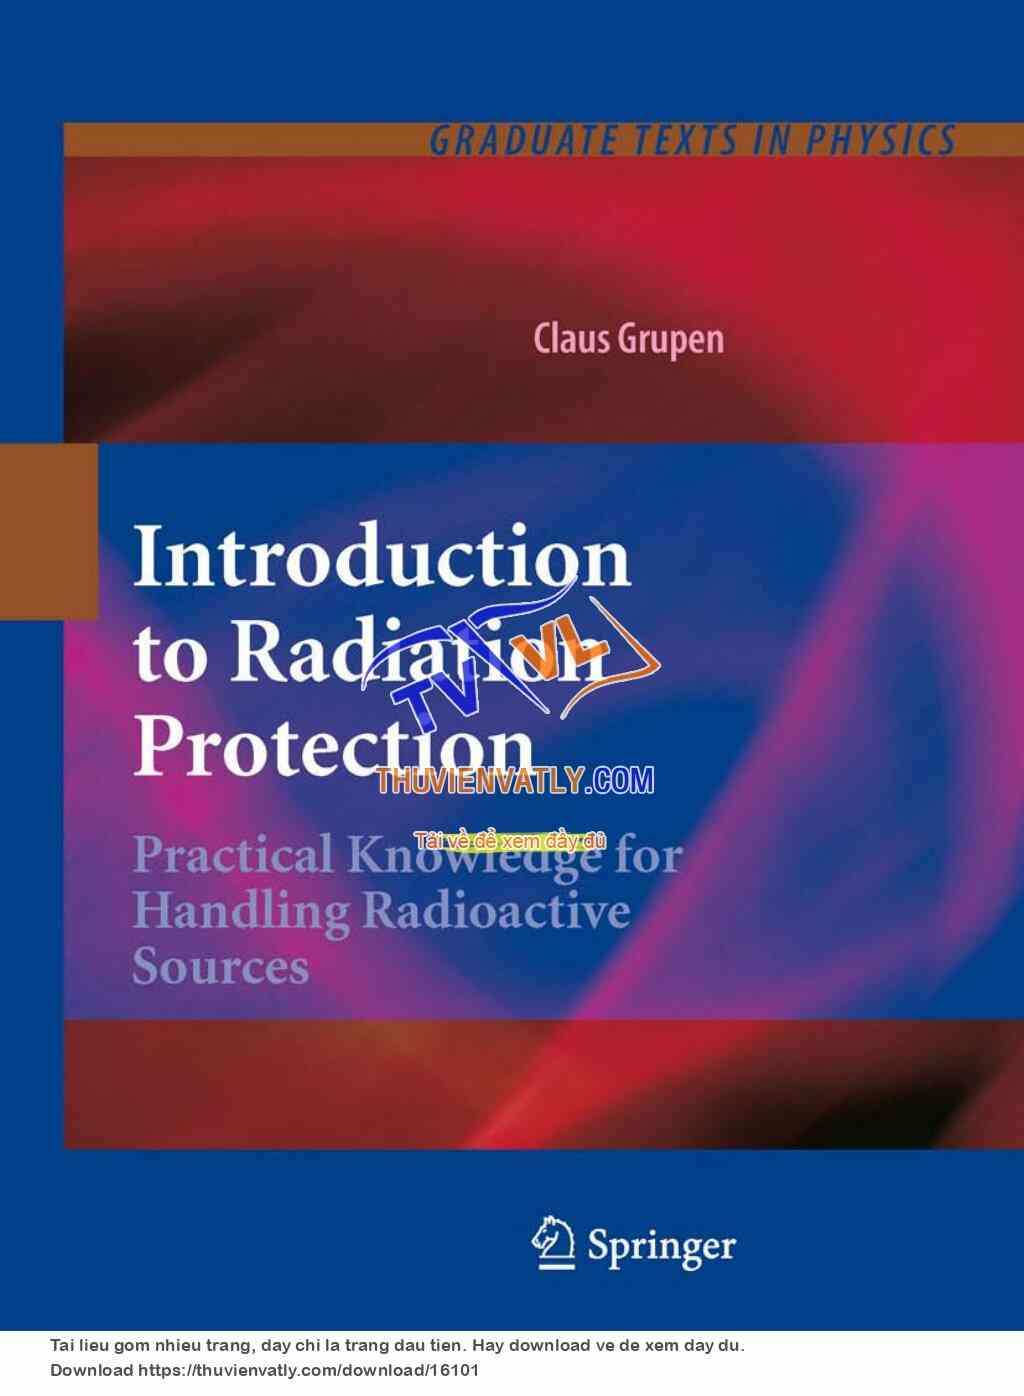 Introduction to Radiation Protection (Claus Grupen, Springer 2010)